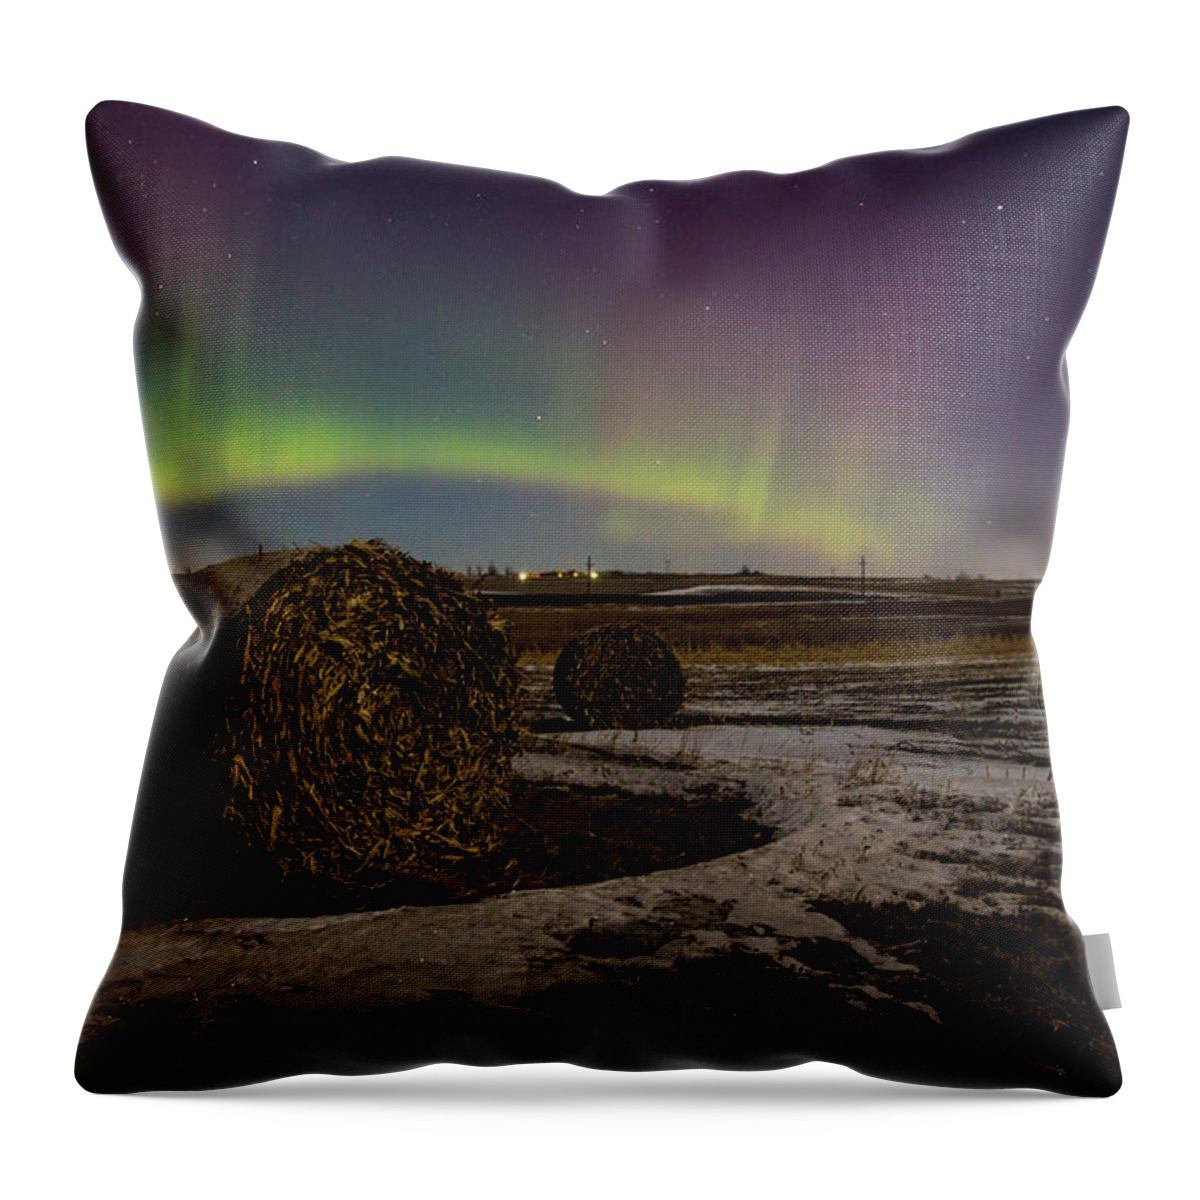 Hay Bales Throw Pillow featuring the photograph Aurora Bales by Aaron J Groen